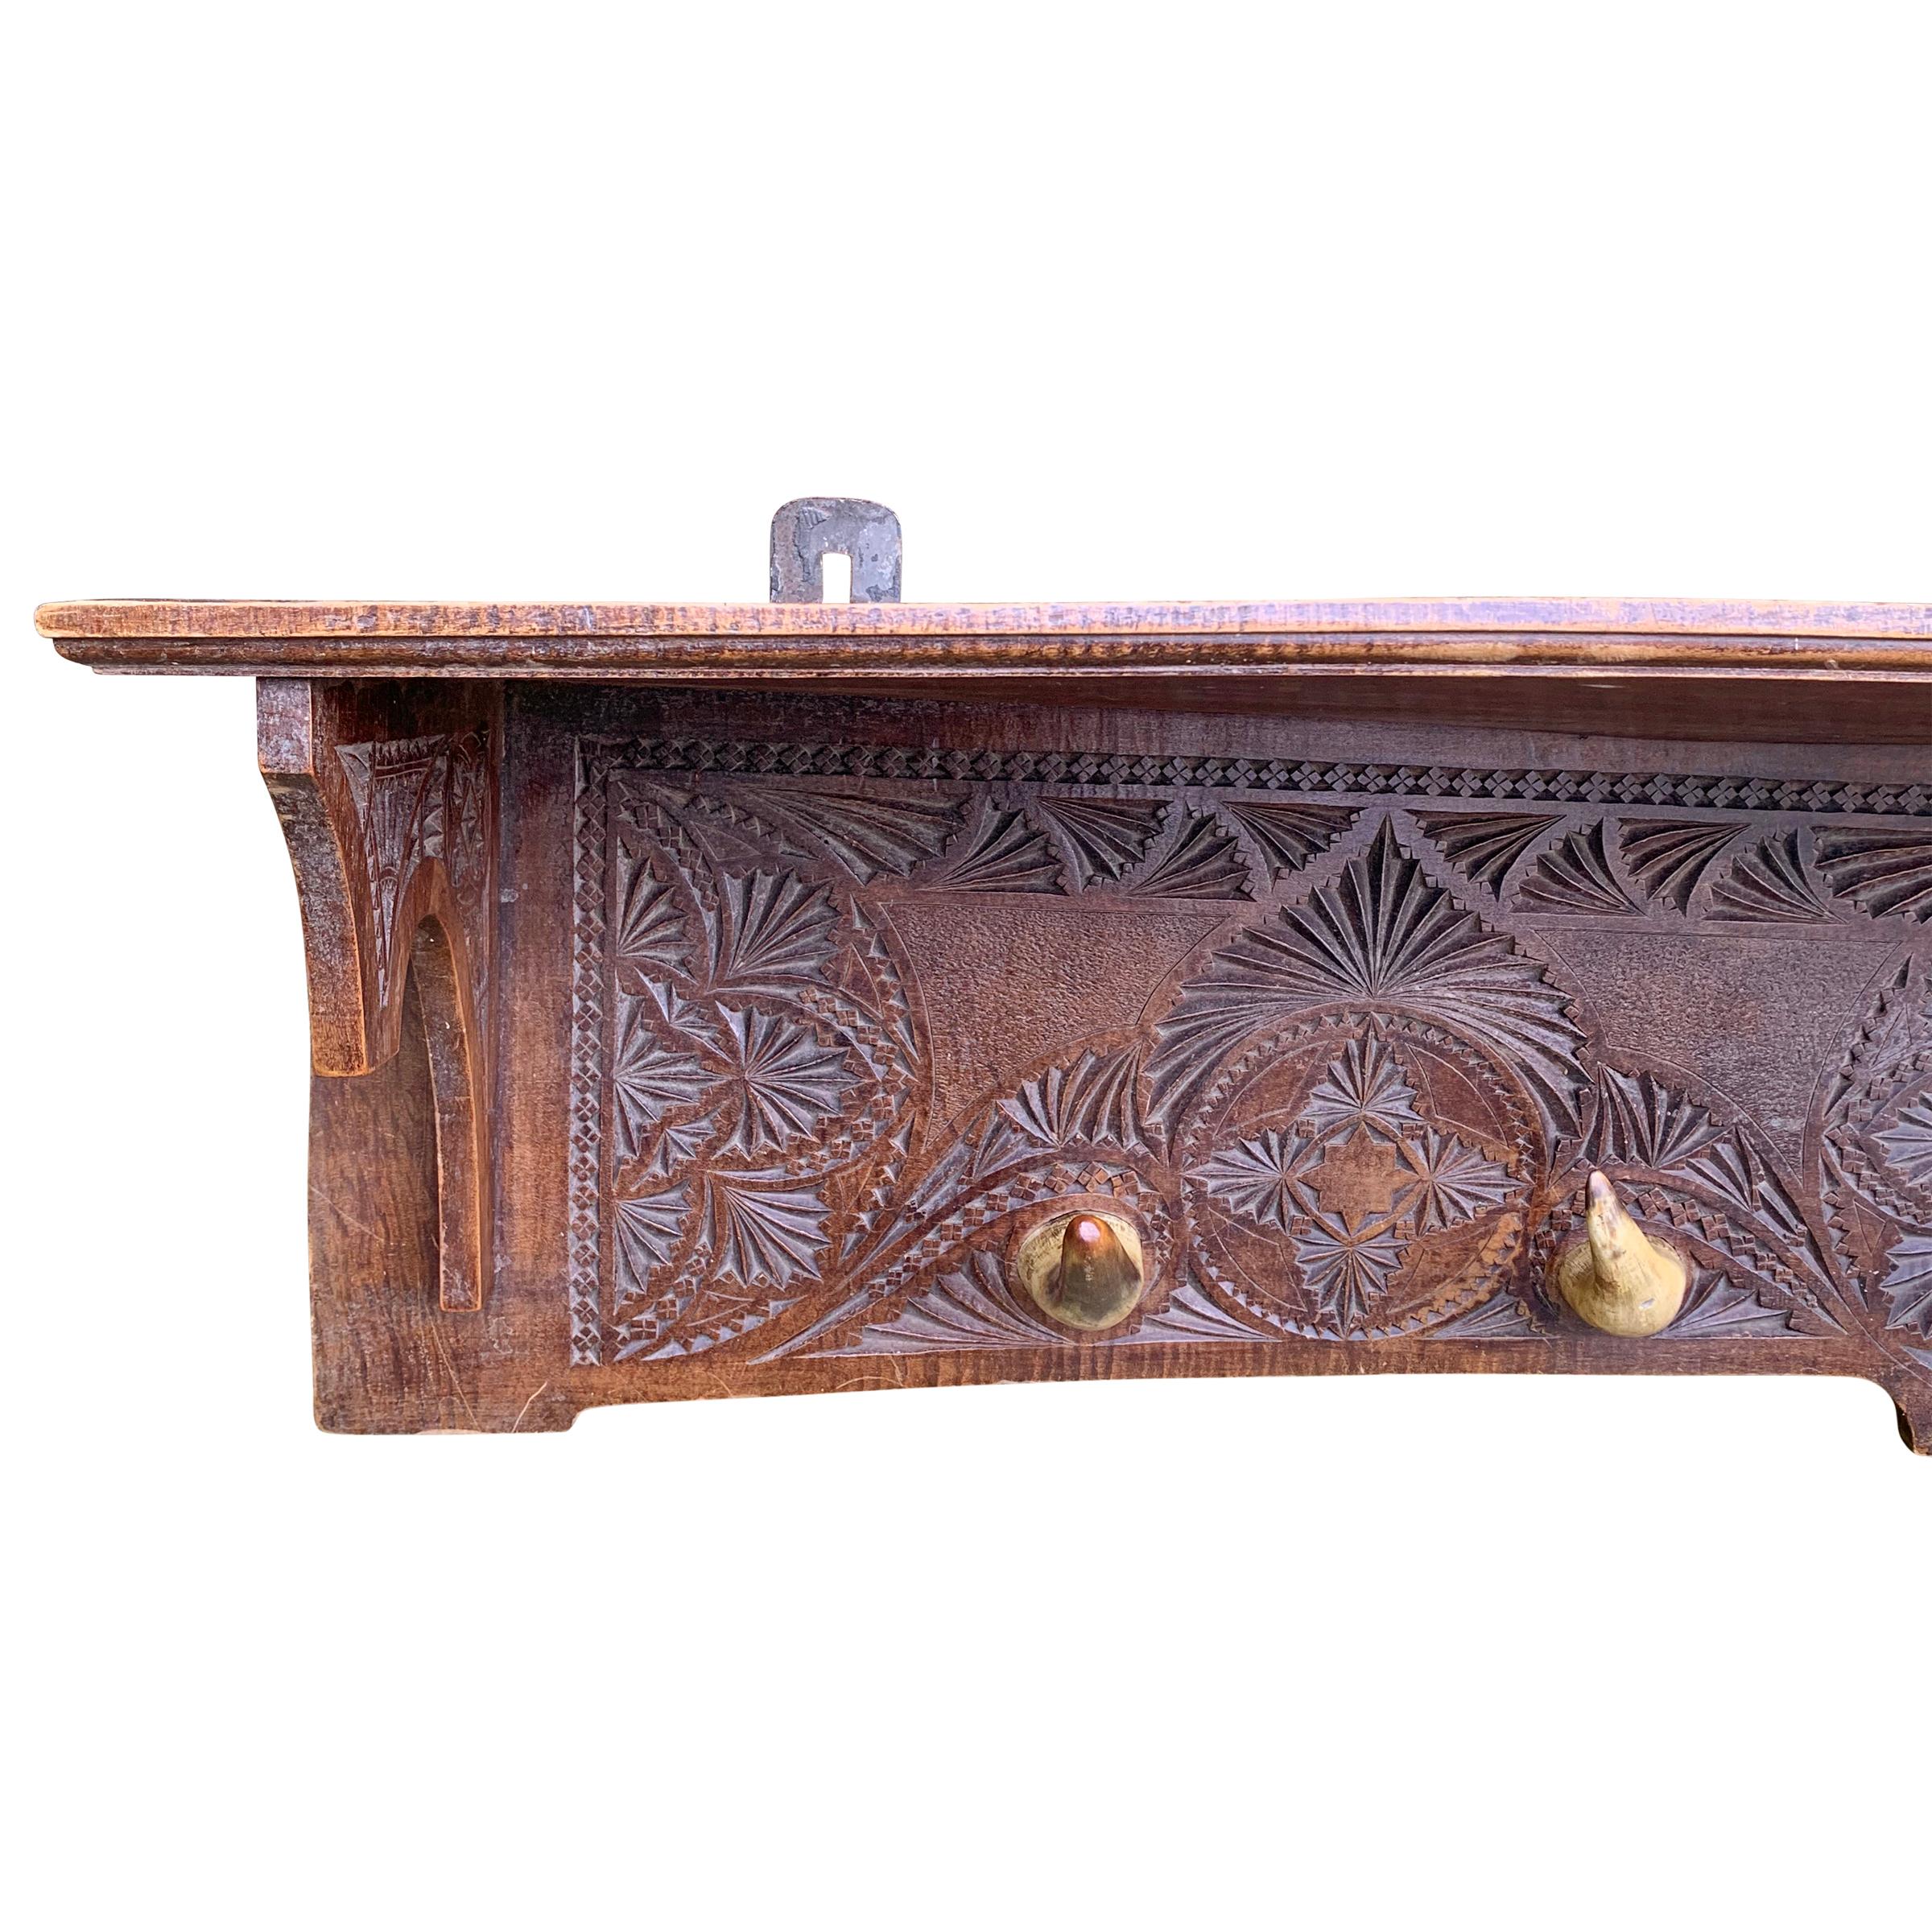 A whimsical 19th century Danish hat/coat rack with wonderful chip carvings and five cow horn hooks. This piece is substantially warped but in a super charming way. It's hung in our shop since we opened and functions wonderfully!